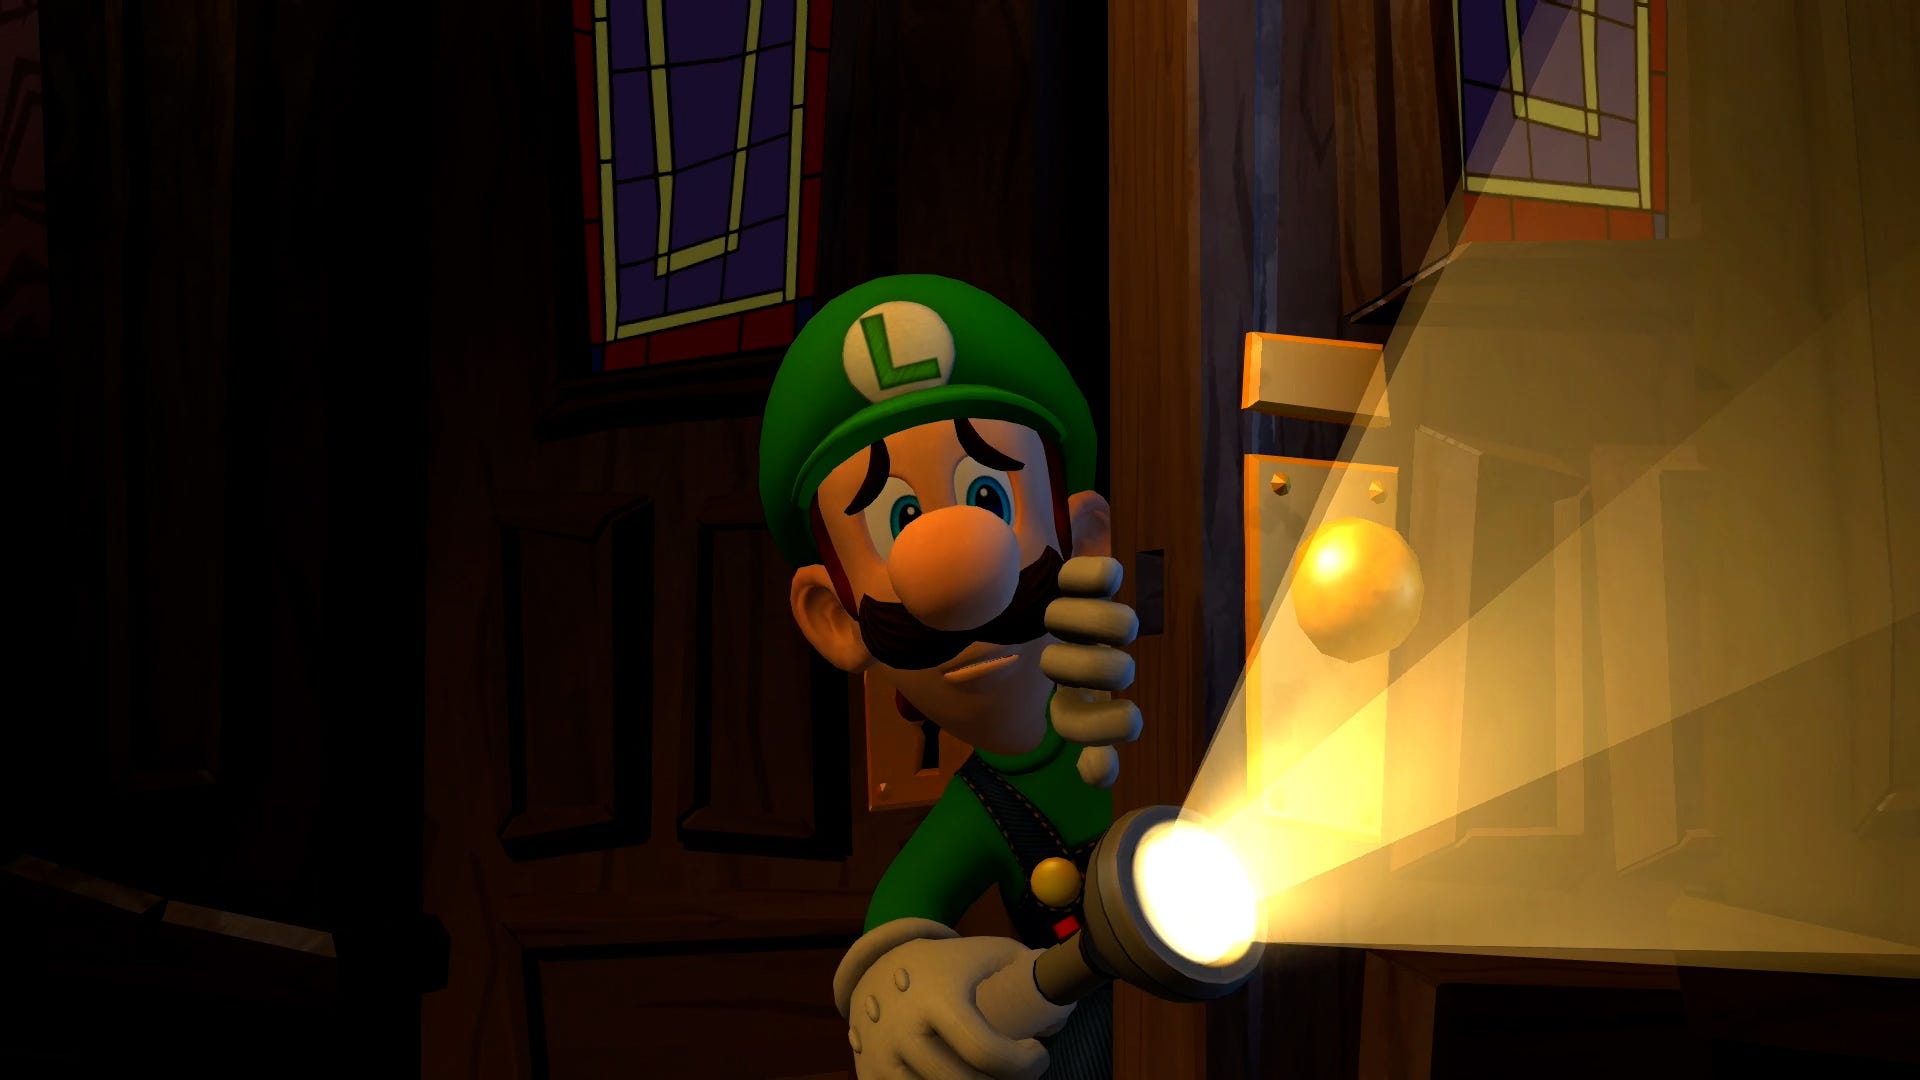 Nintendo Direct Here's what's coming, including Paper Mario, Princess